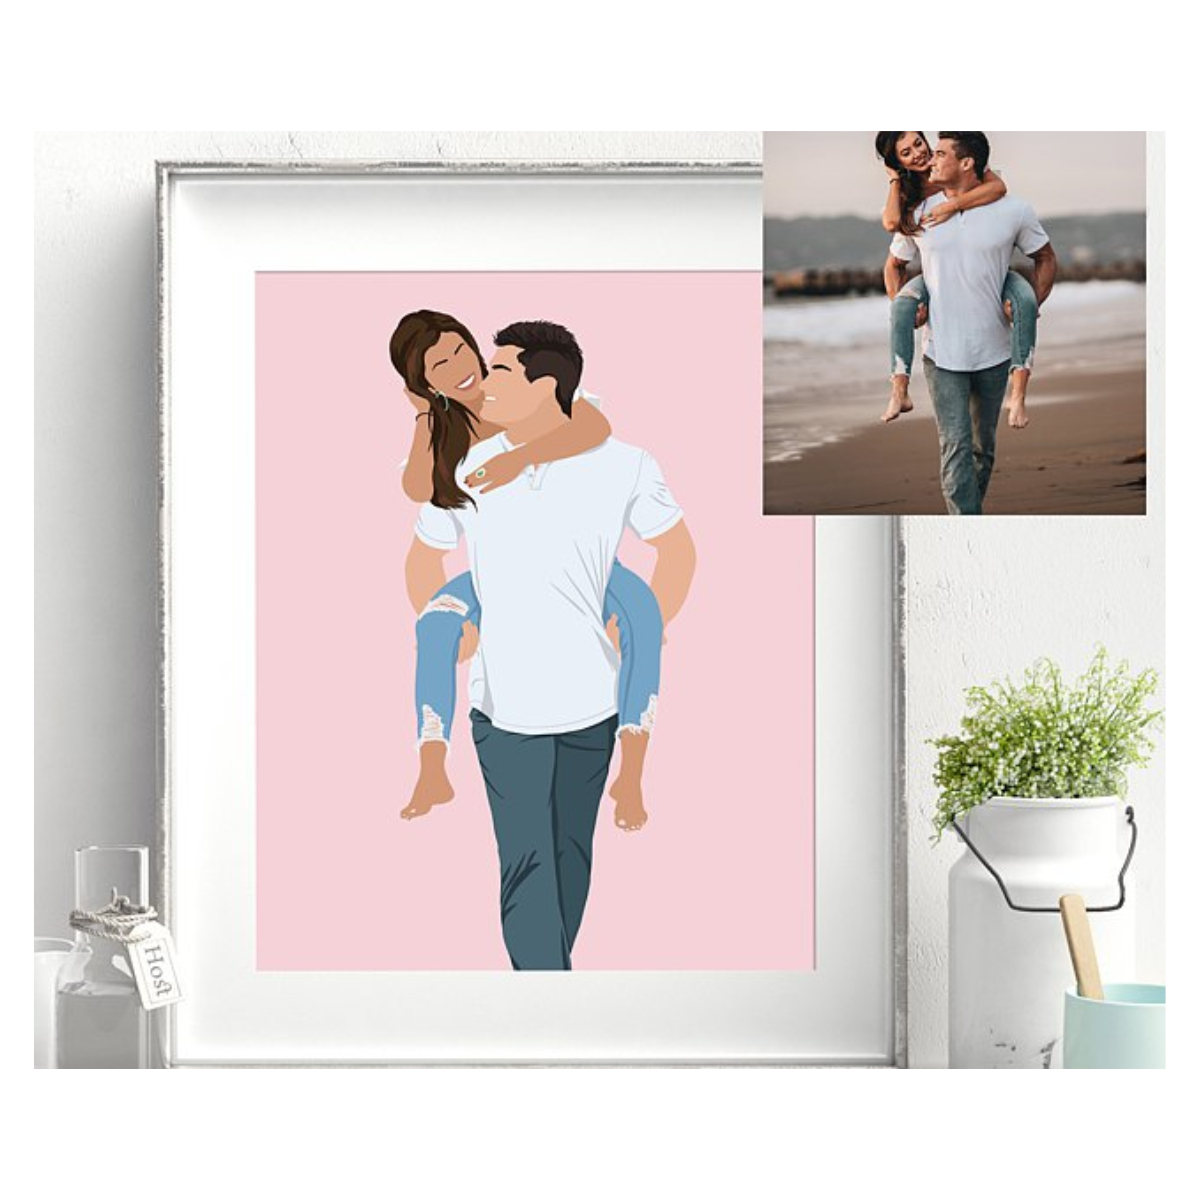 13. Capture Your Love Story: Personalized Anniversary Date Art - The Perfect Gift Idea